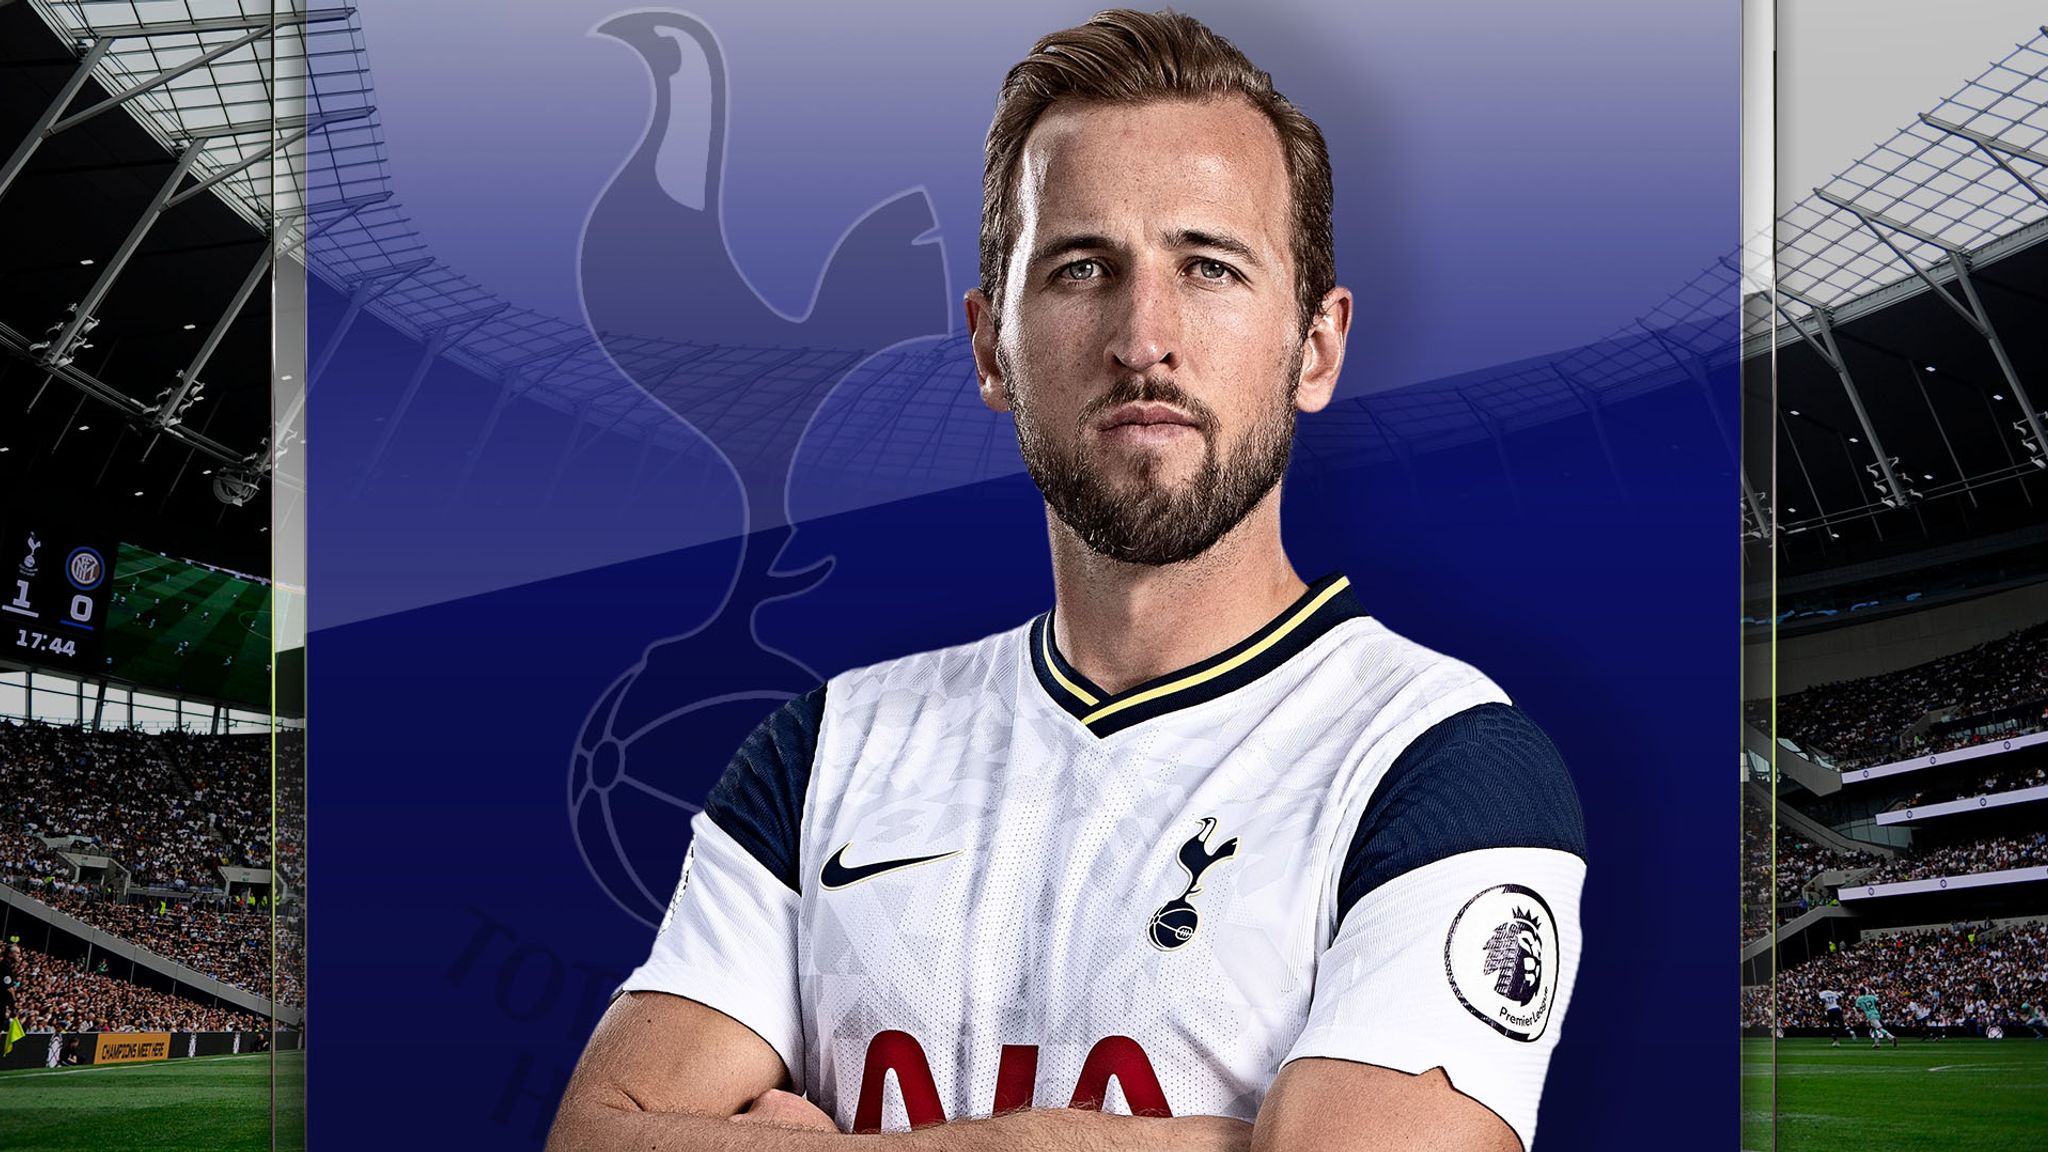 Why does Harry Kane want to leave Tottenham for Manchester City